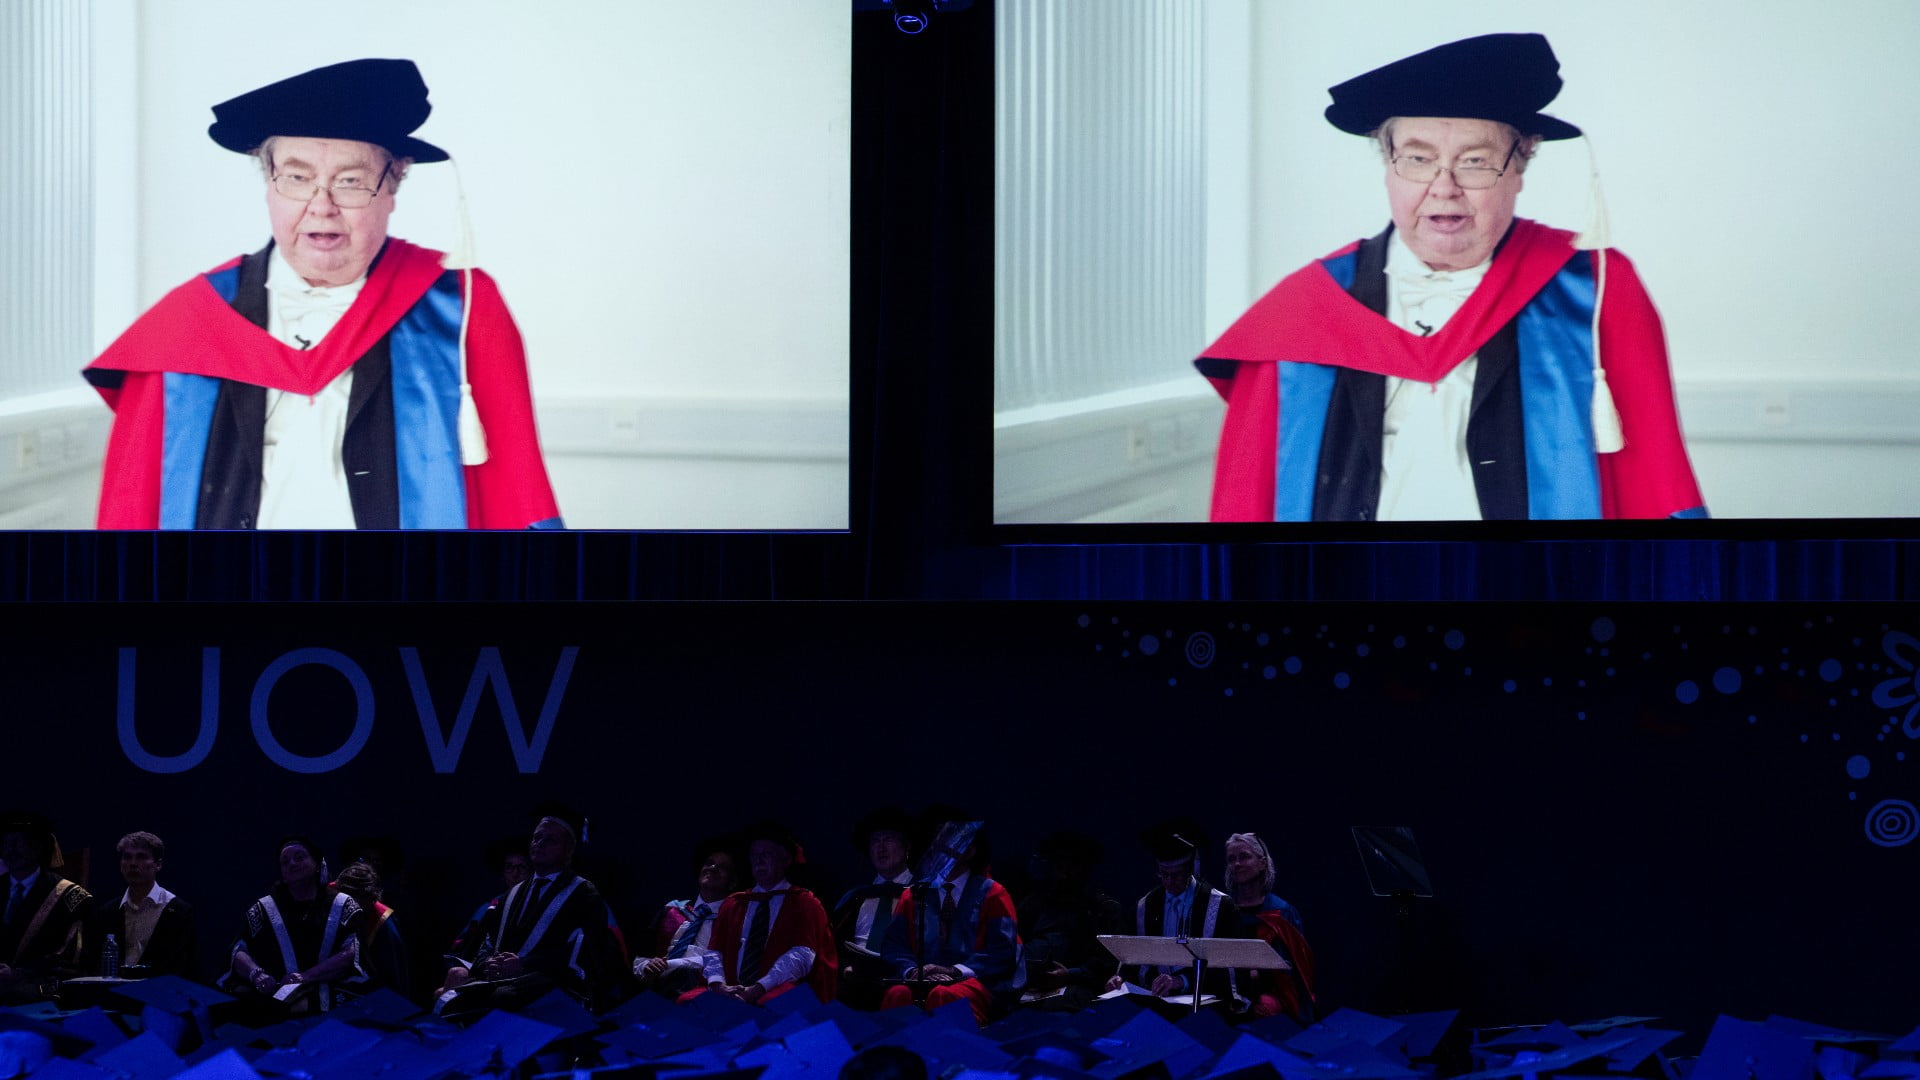 Professor Robin Thompson, pictured on a video screen in a graduation gown and cap, speaks to the audience at the UOW graduation ceremony. Photo: Paul Jones